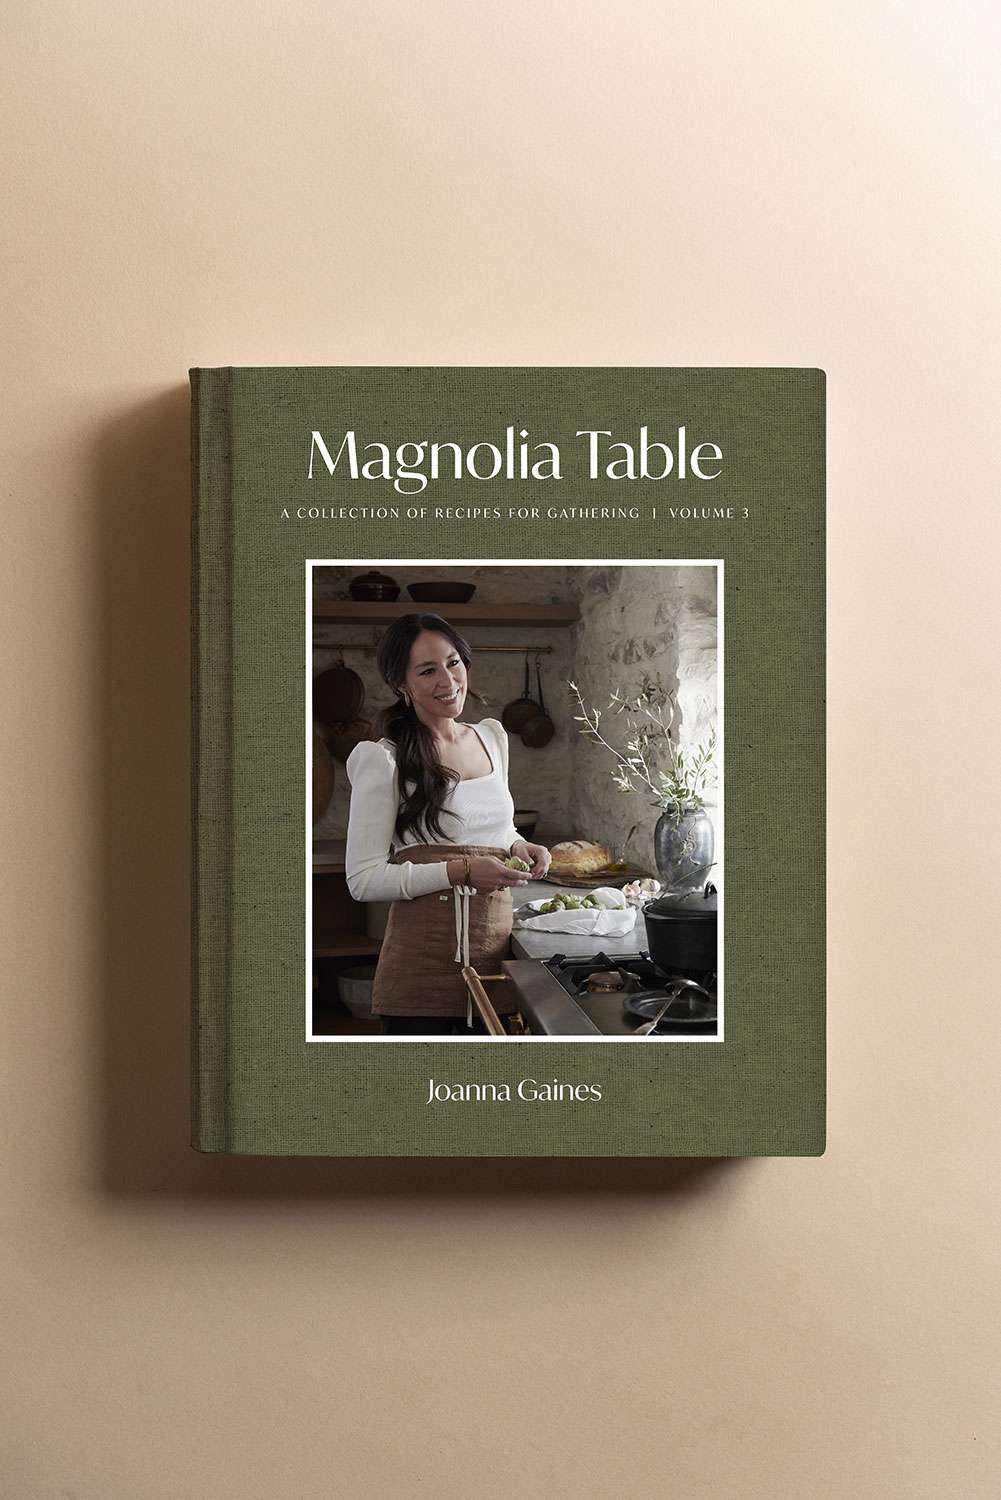 Magnolia Table Volume 3 by Joanna Gaines